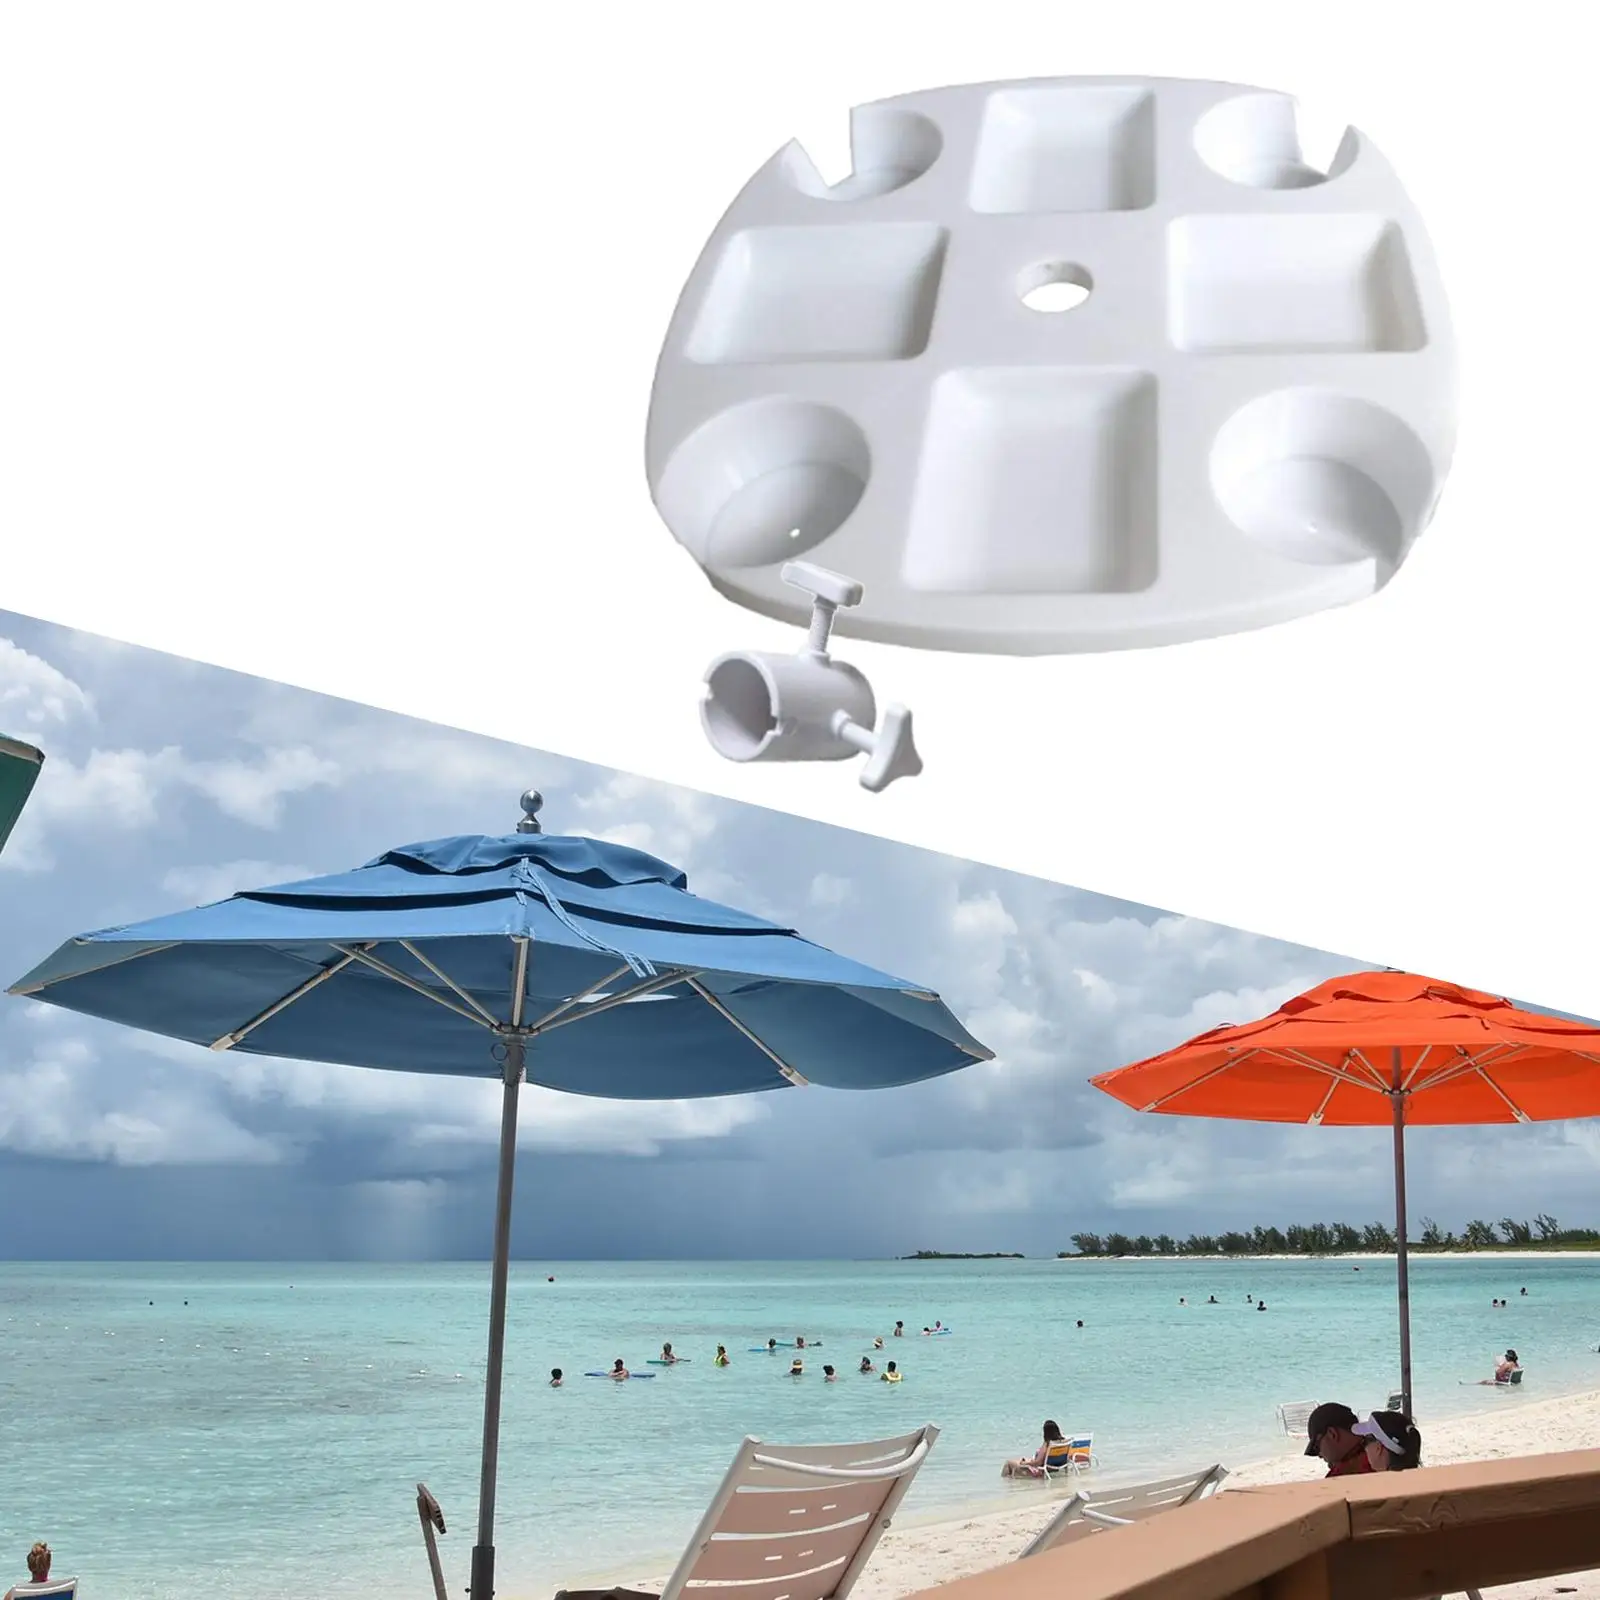 Summer Beach Umbrella Table Tray 4 Snack Compartments Outdoor Snack Drink Holder for Beach Swimming Pool Patio Garden